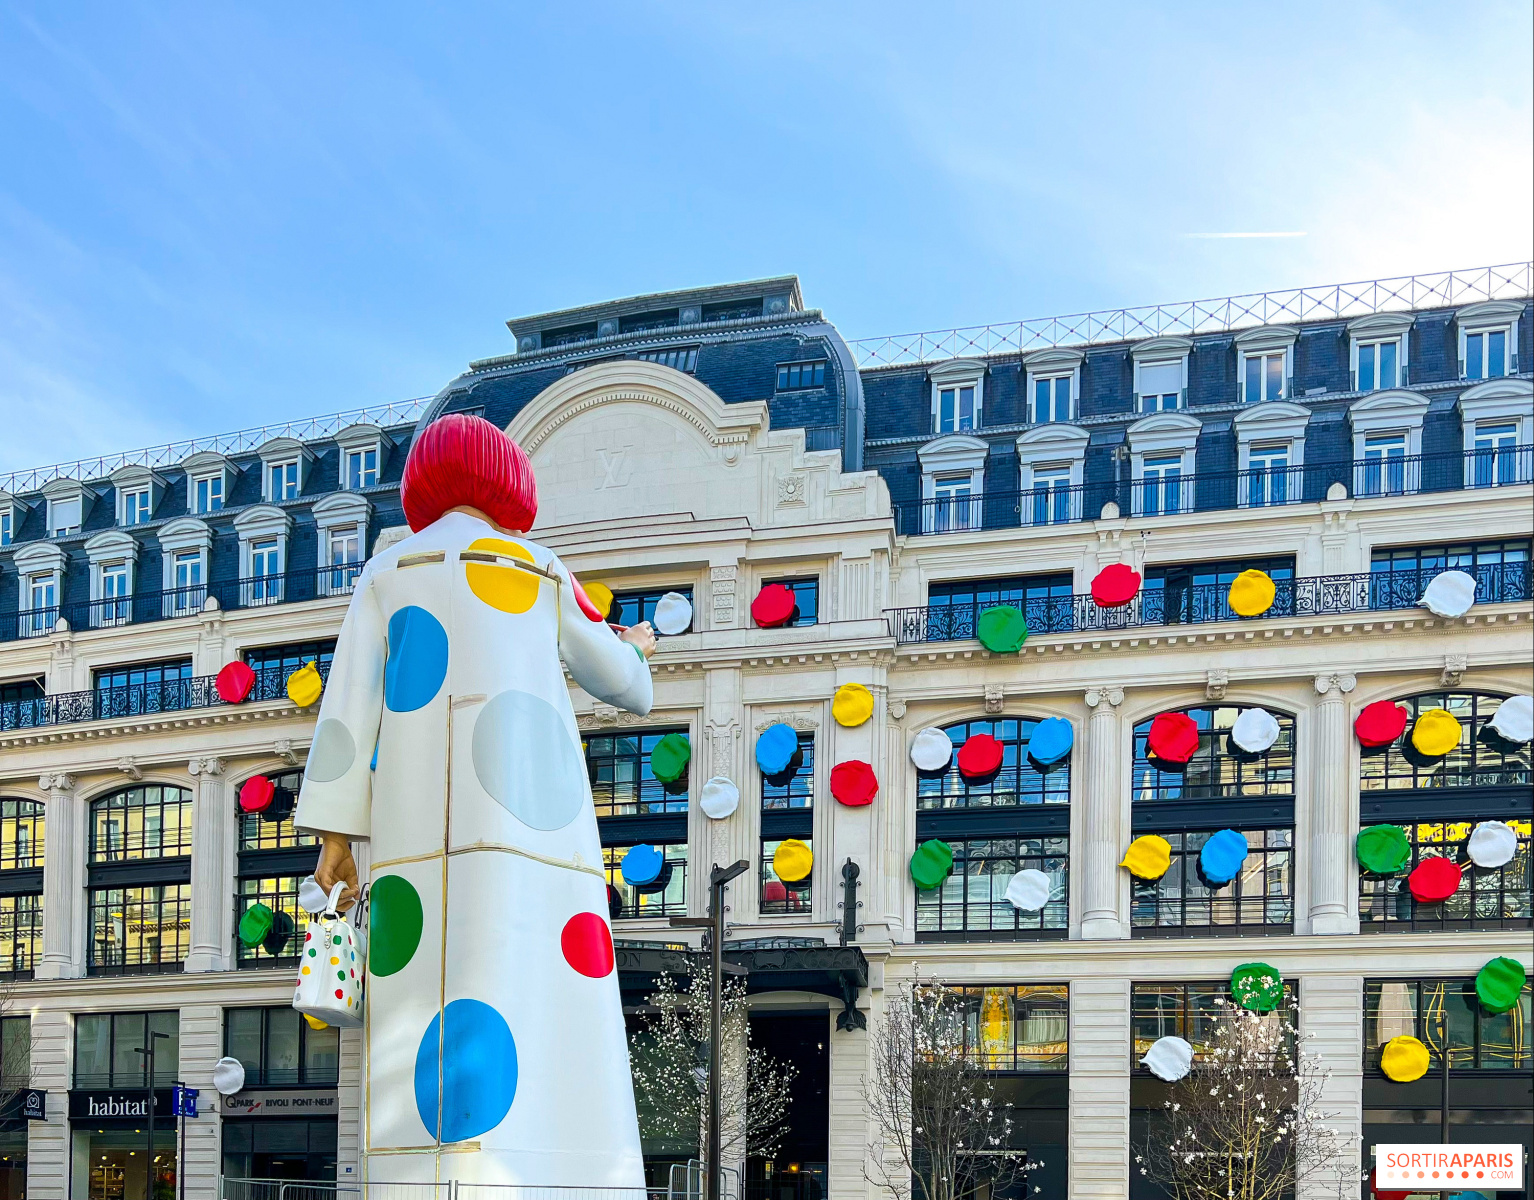 The gigantic Yayoi Kusama in front of the Louis Vuitton headquarters,  facing the Samaritaine 